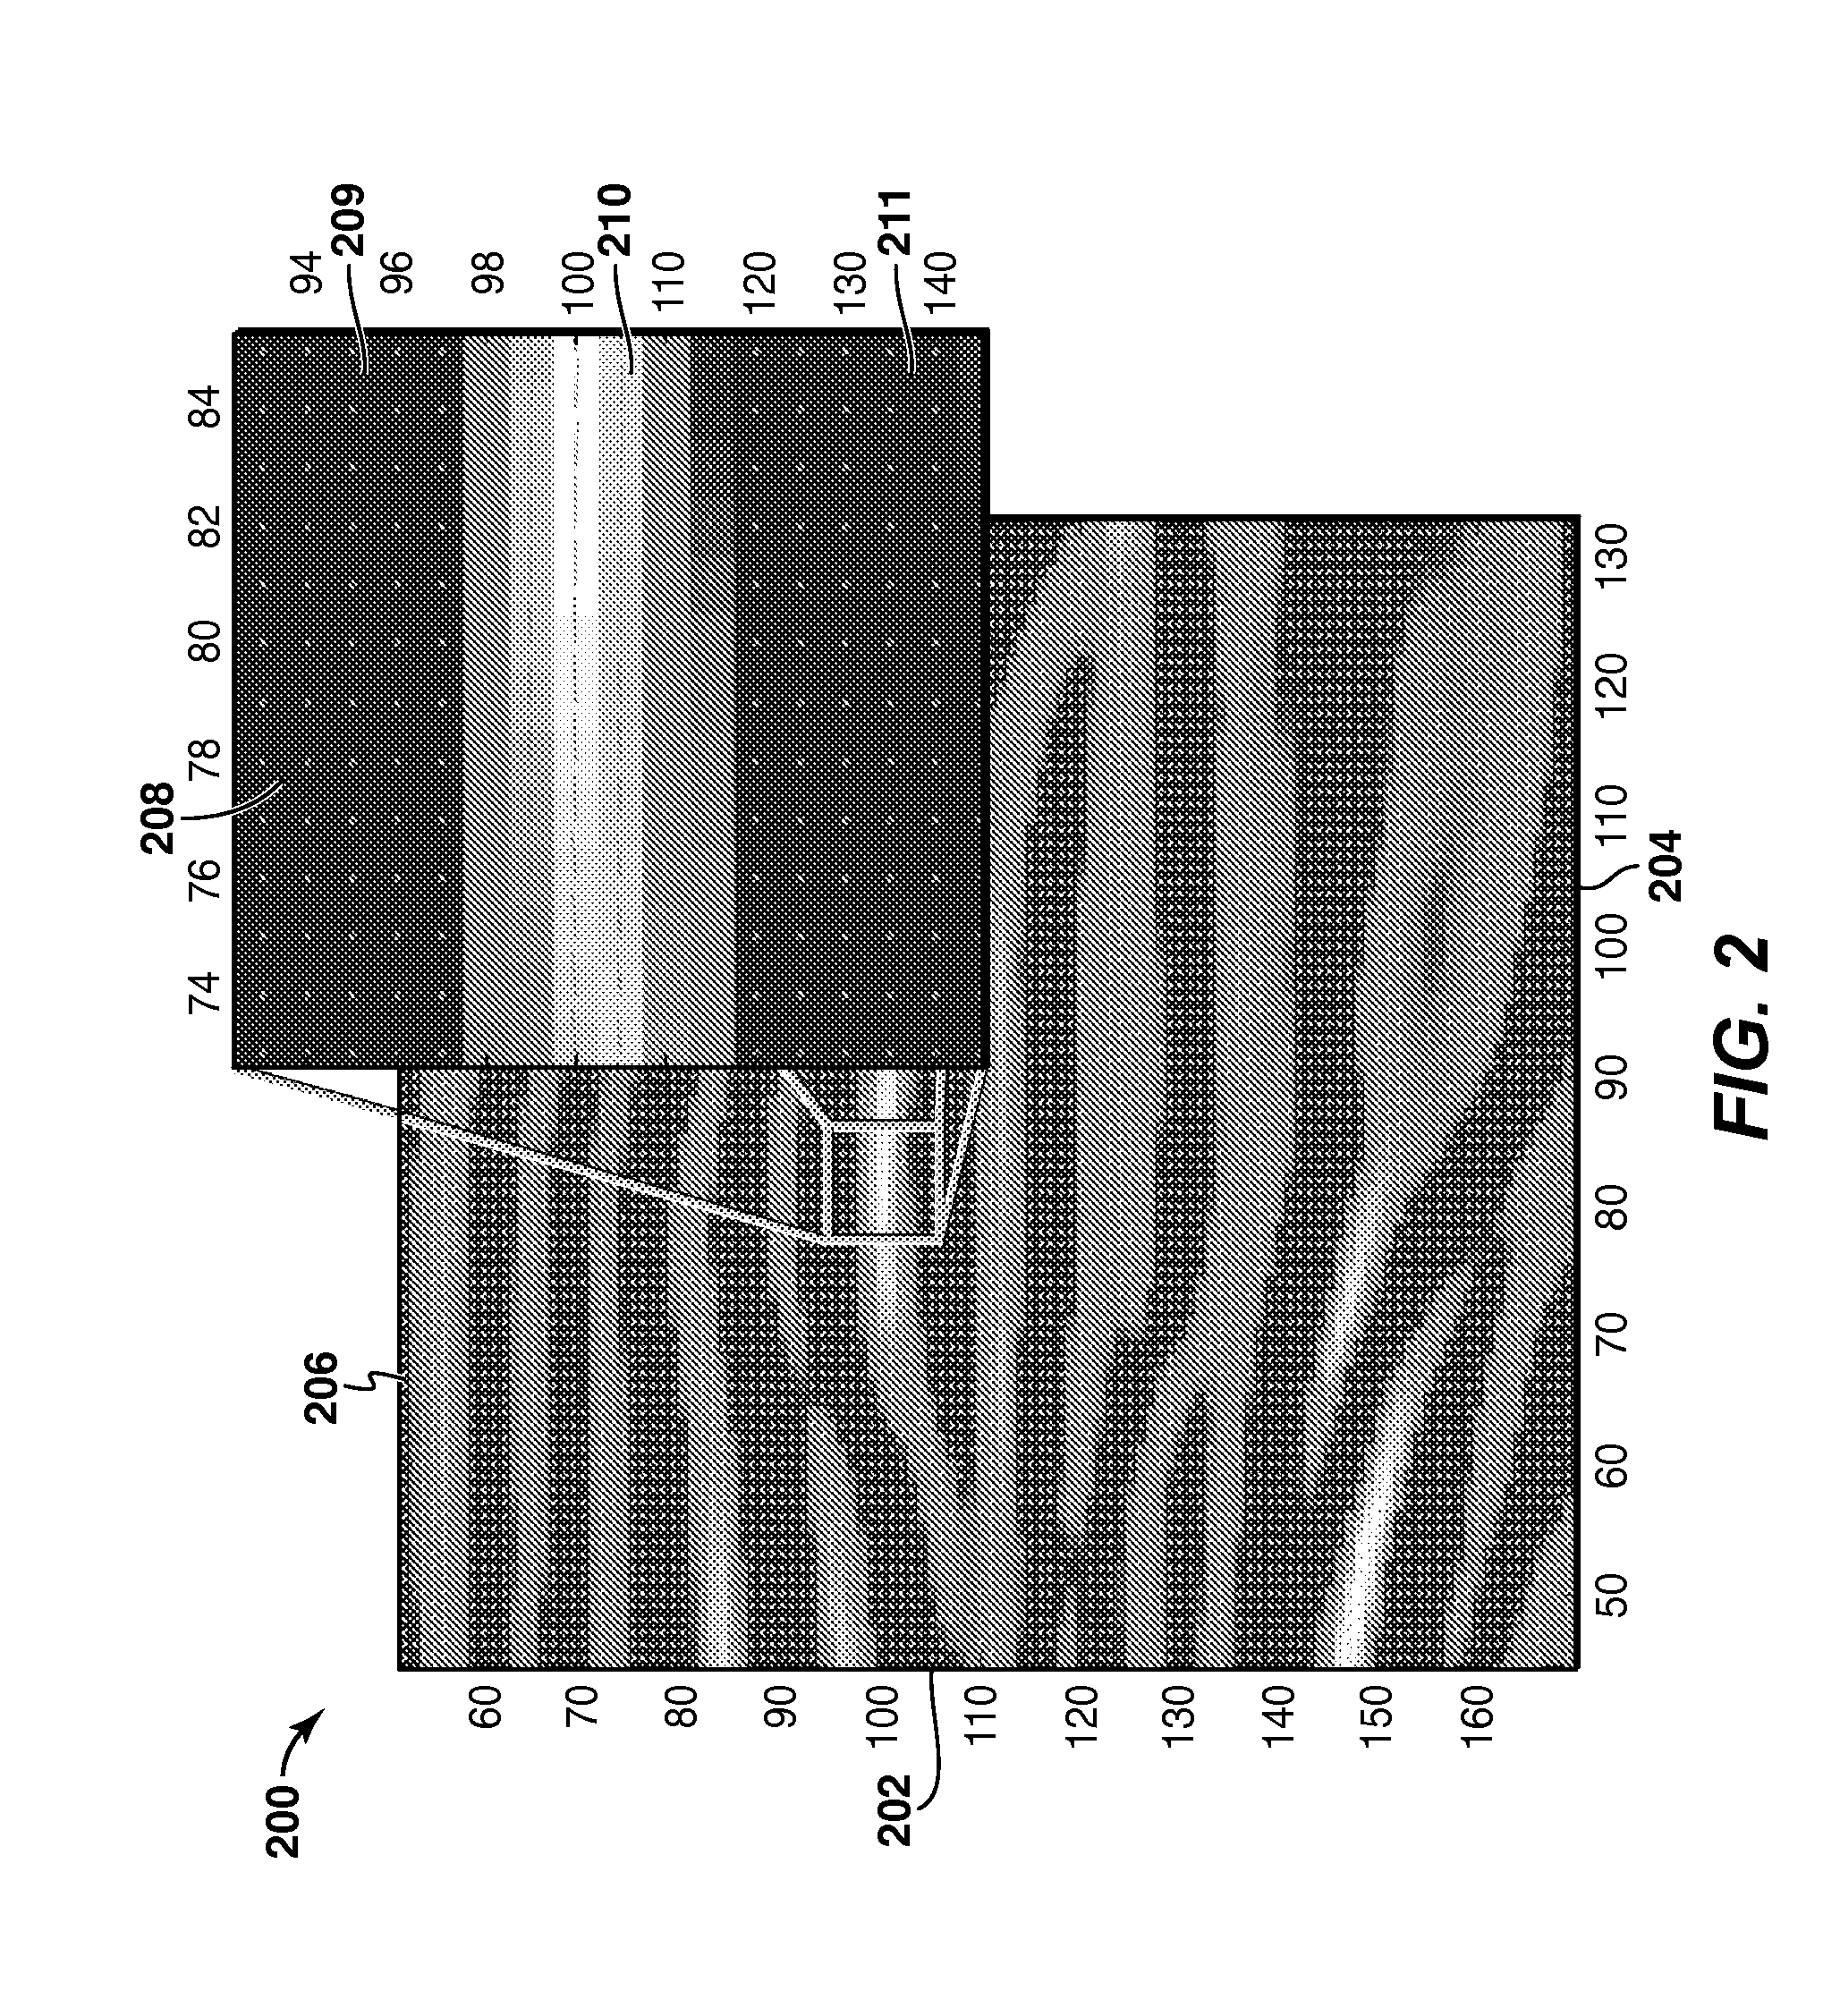 Method and System for Geophysical Modeling of Subsurface Volumes Based on Label Propagation